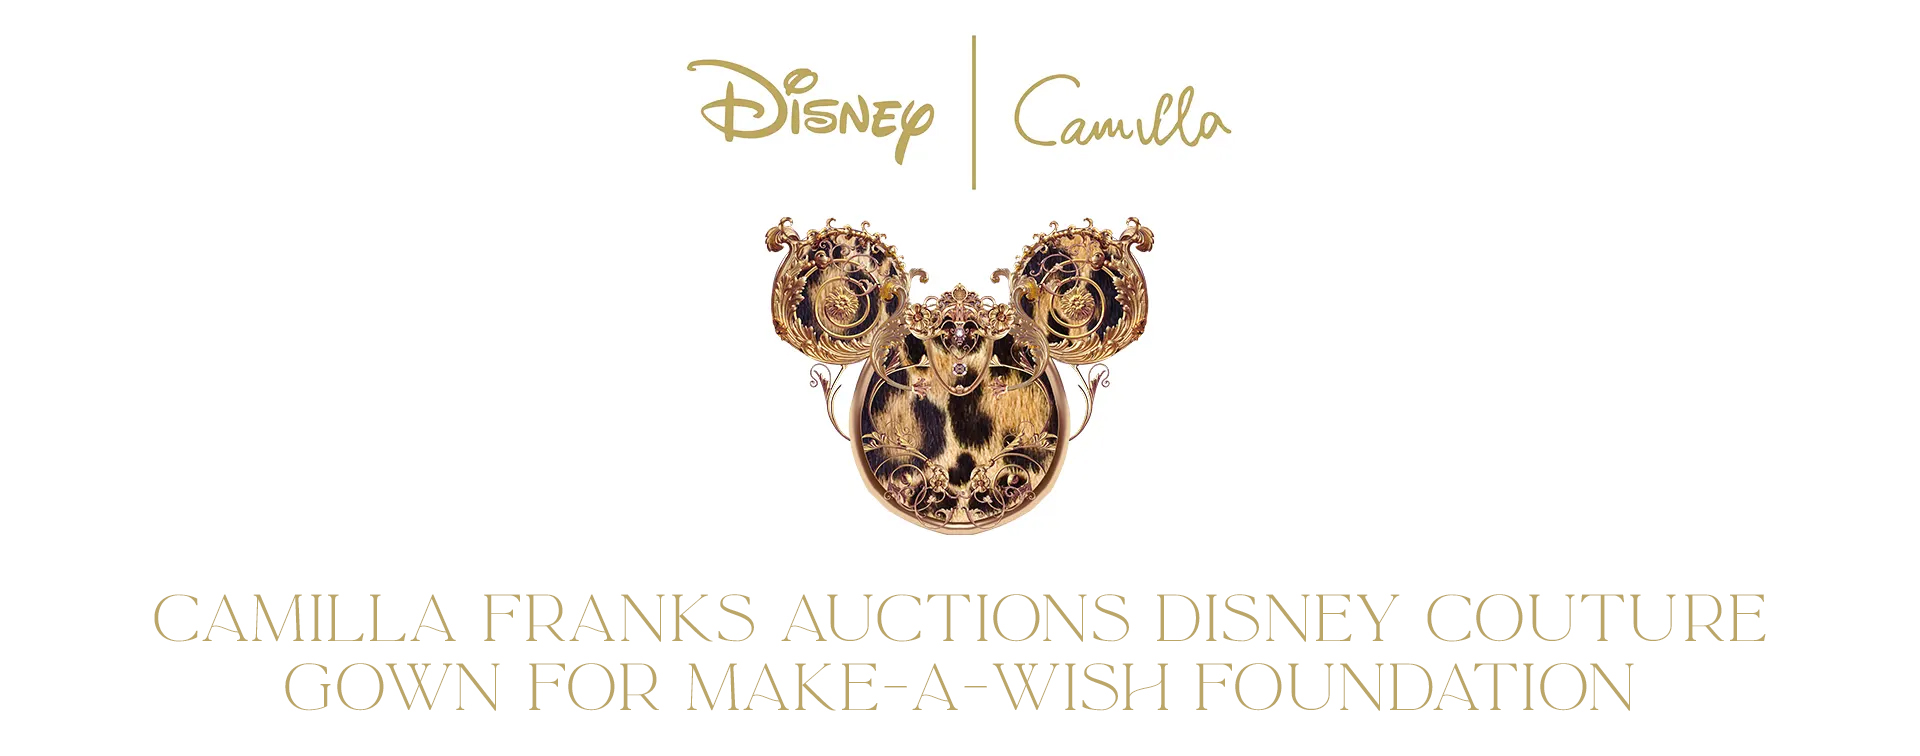 CAMILLA FRANKS AUCTIONS DISNEY COTURE GOWN FOR MAKE A WISH FOUNDATION